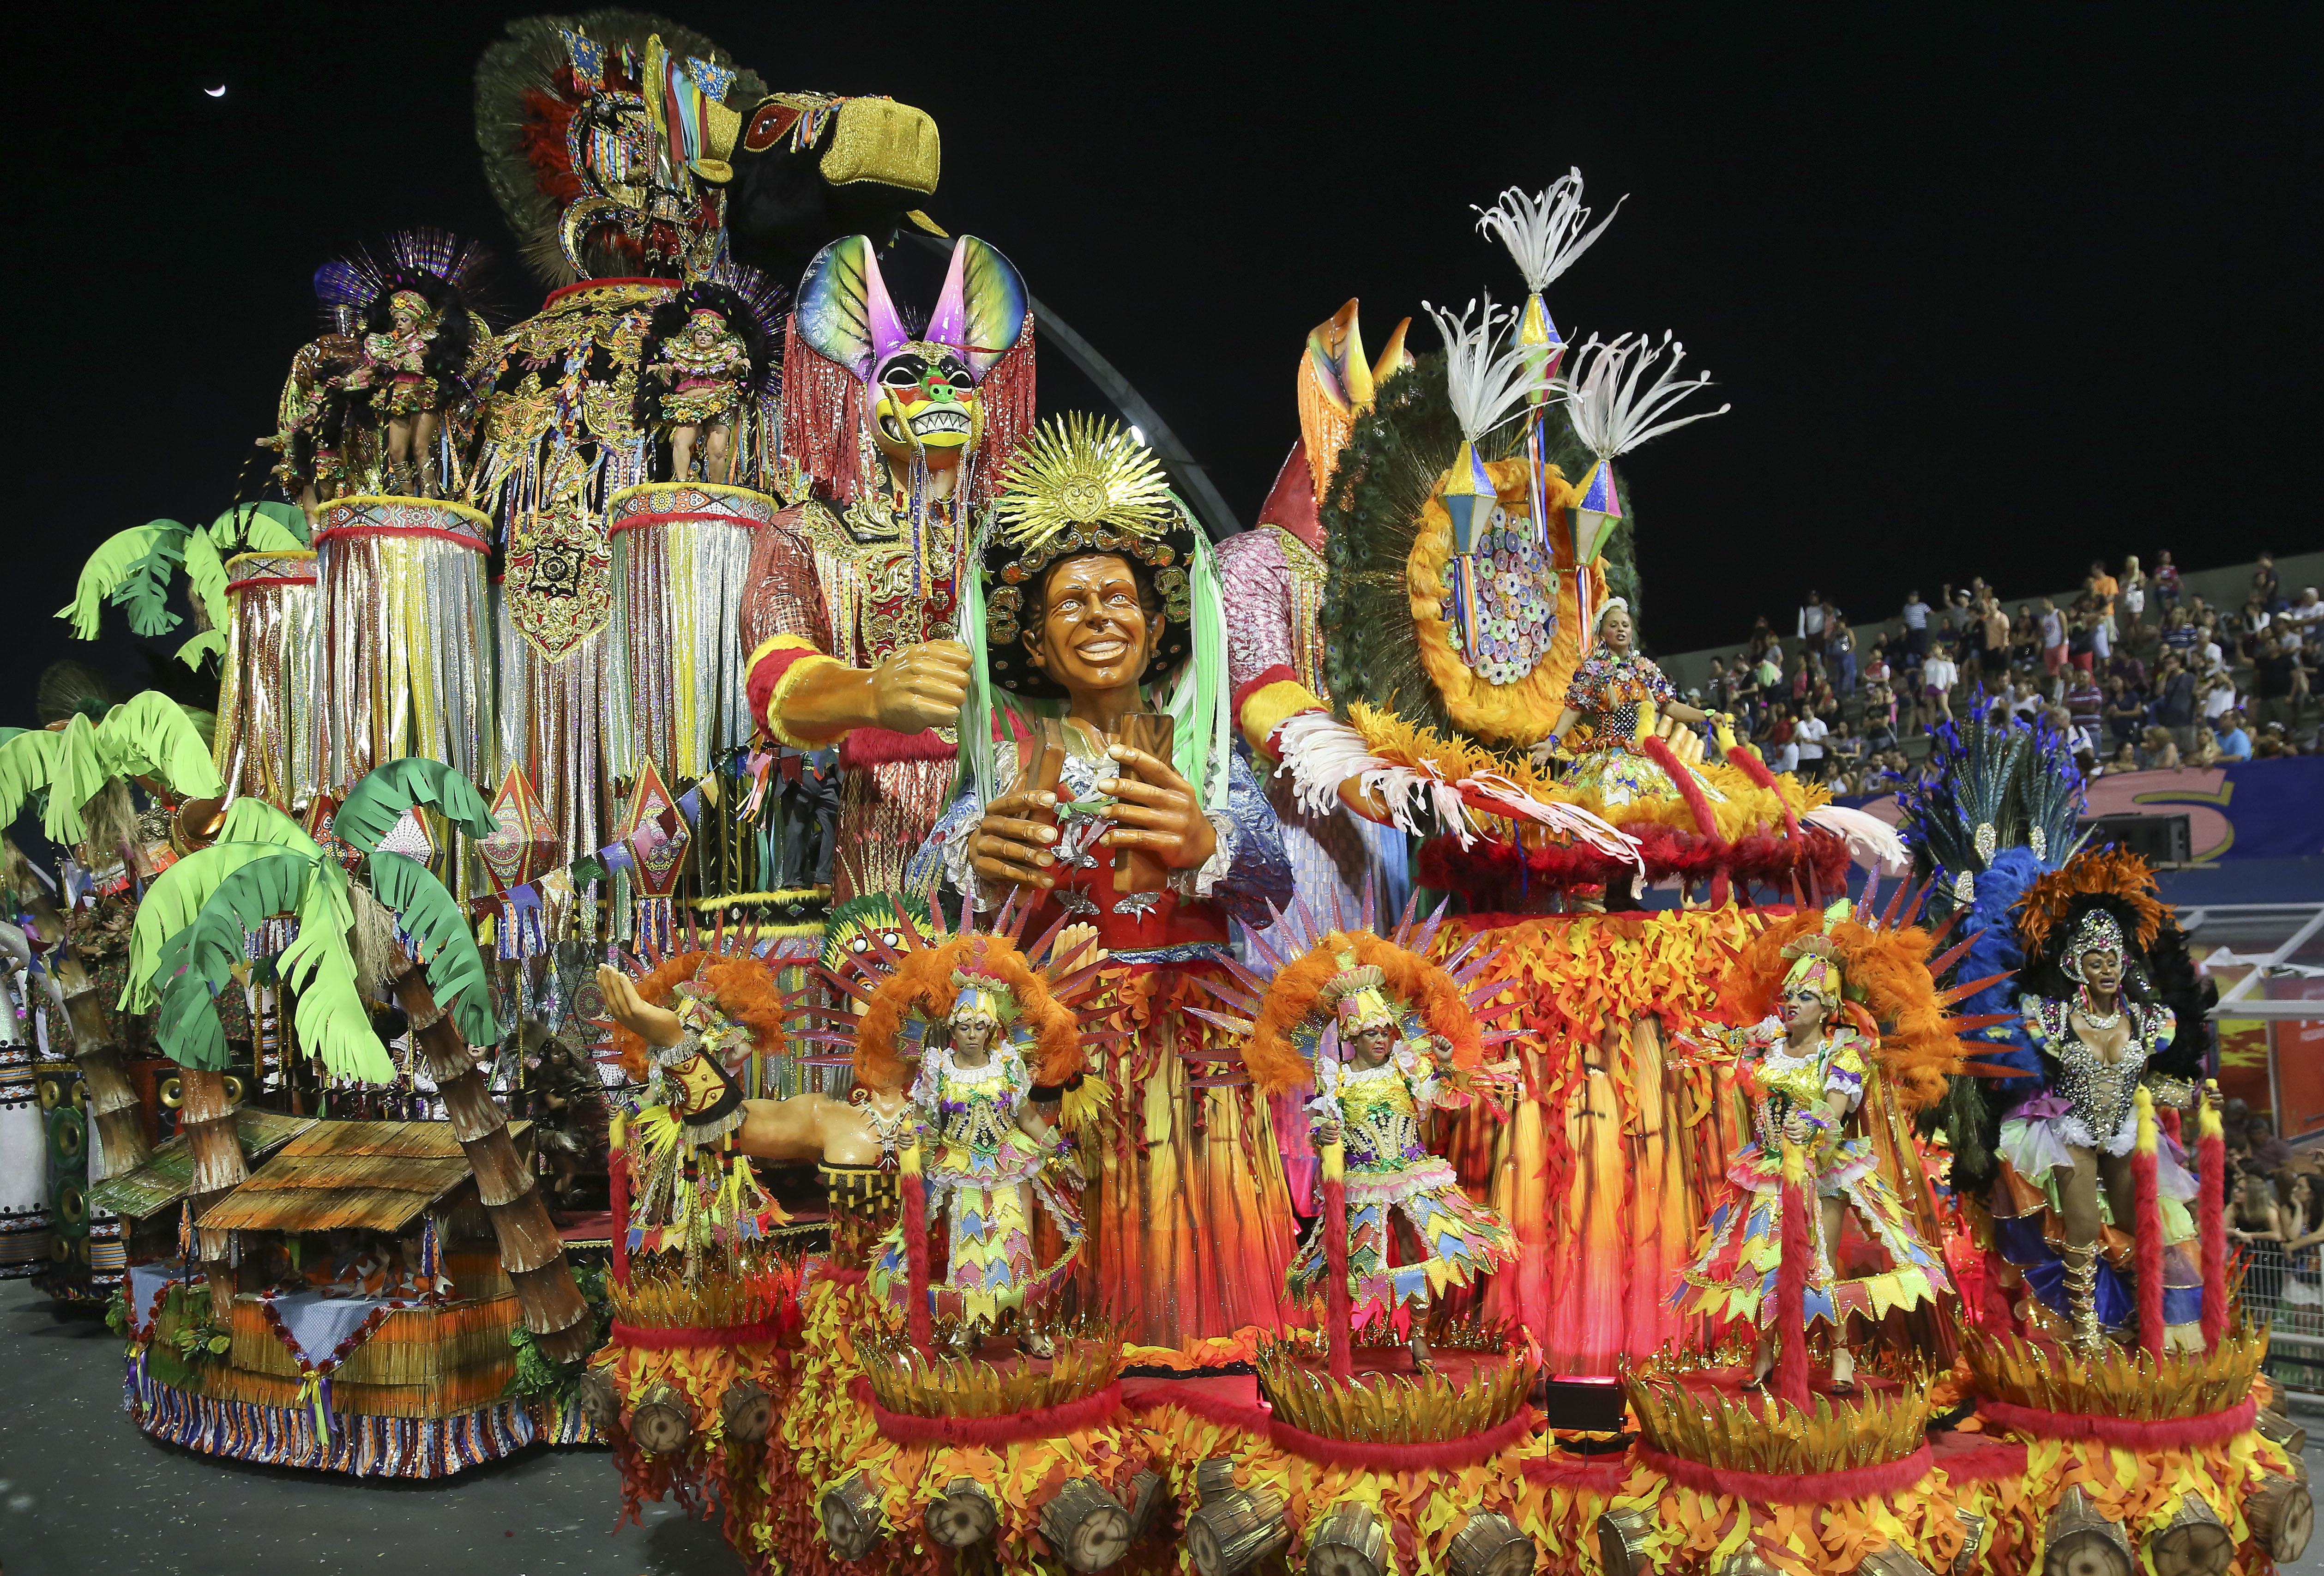 Dancers from the Academicos do Tatuape samba school perform on a float during a carnival parade in Sao Paulo (Andre Penner/AP)